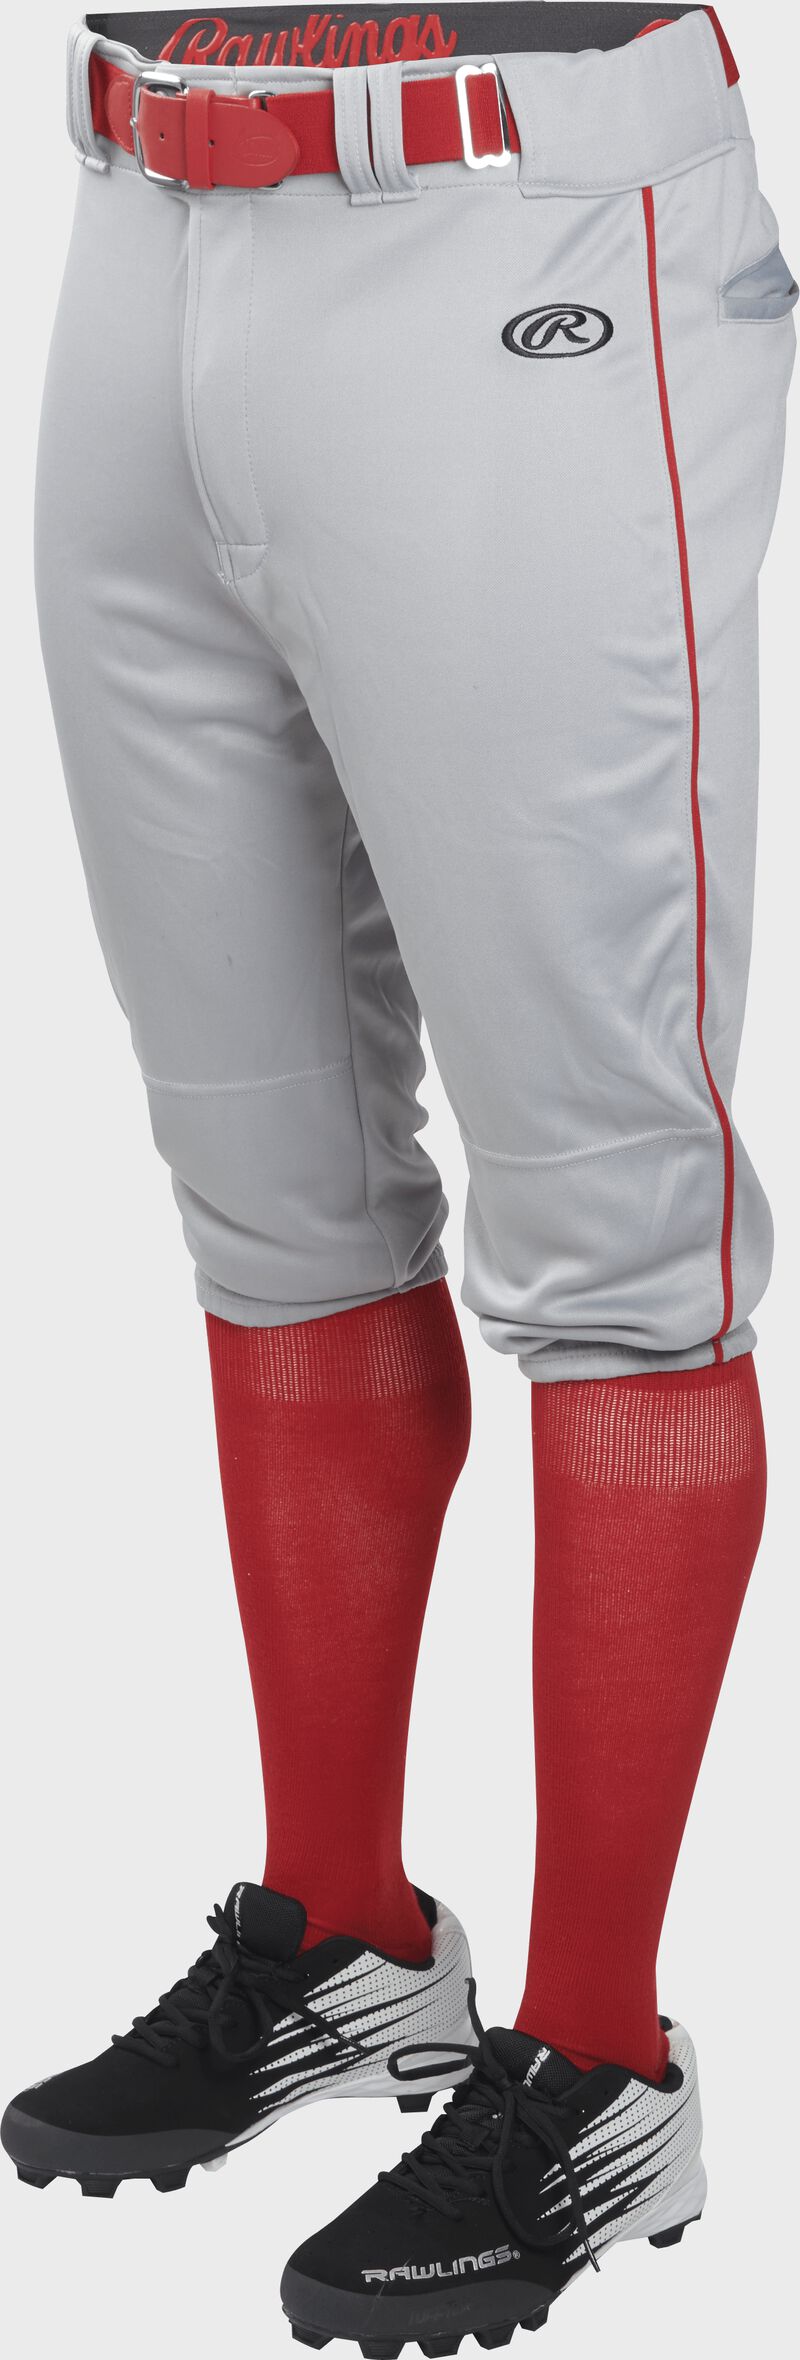 Front of Rawlings Blue Gray/Scarlet Adult Launch Piped Knicker Baseball Pant - SKU #LNCHKPP-BG/S image number null